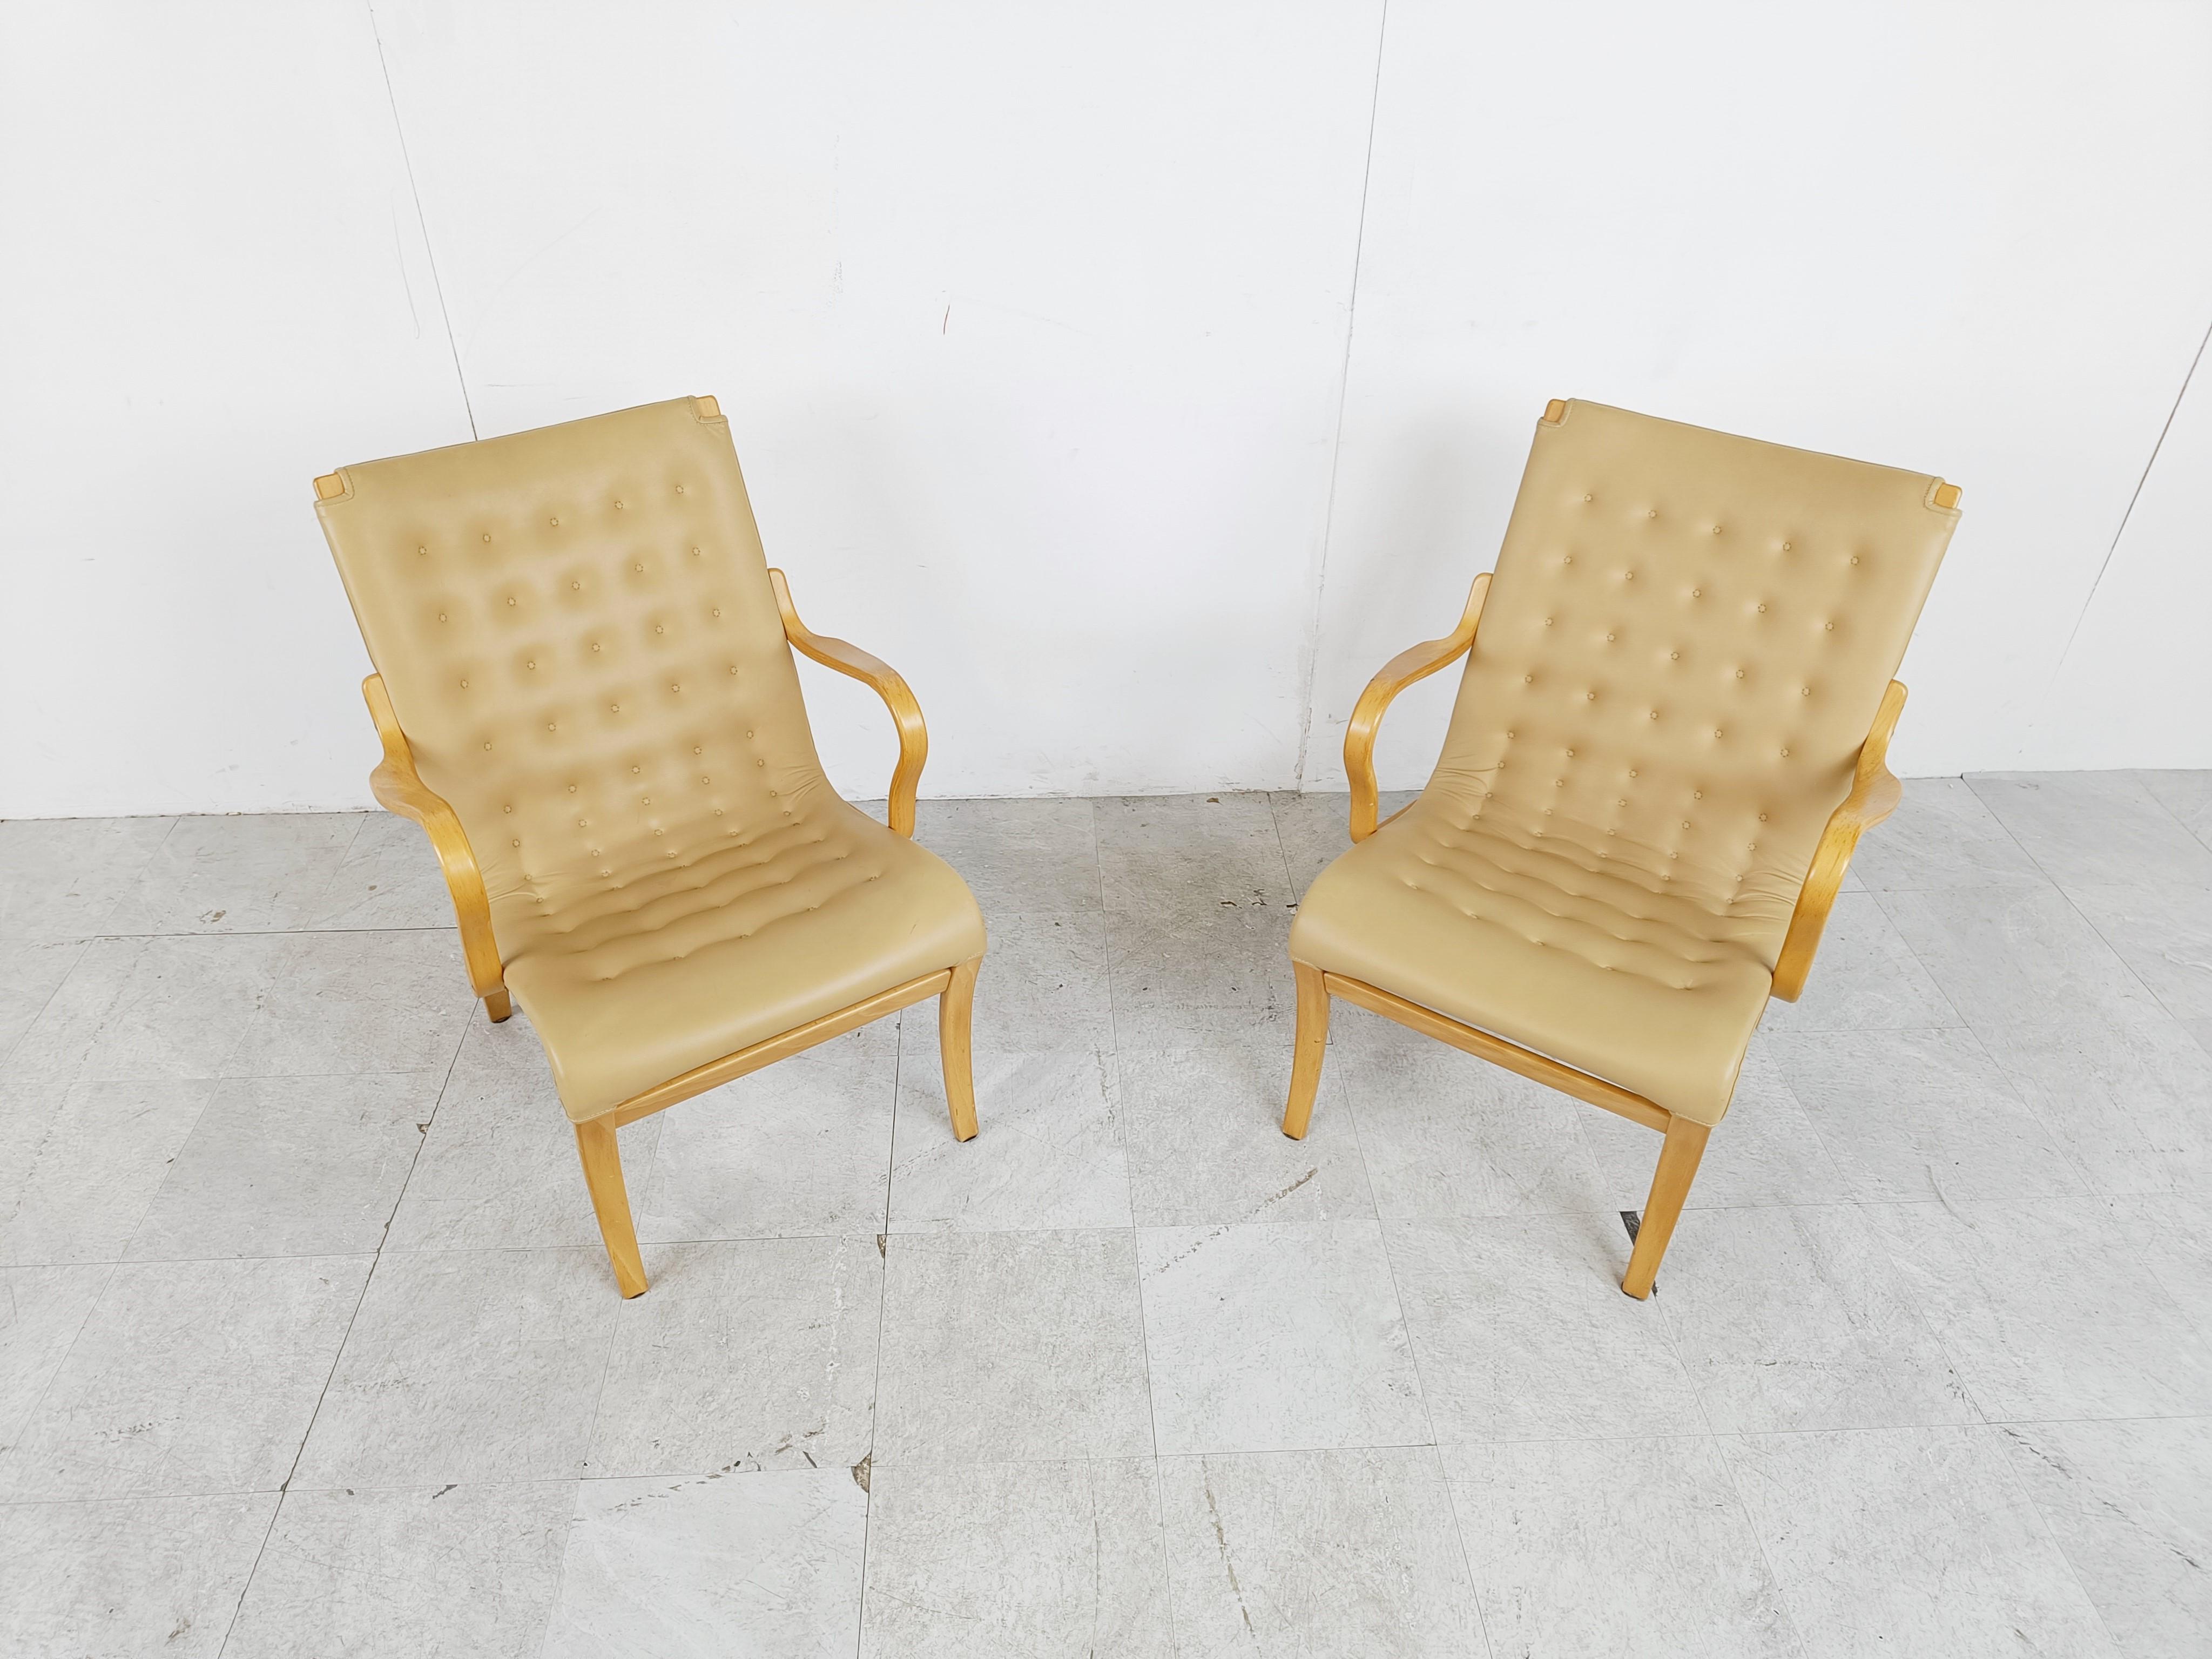 Midcentury tufted leather 'Mina' armchairs designed by Bruno Mathsson for DUX

The chair have beautiful and elegant beech wooden frames upholstered with high quality leather.

Good condition

1960s - Sweden.

Dimensions:
Height: